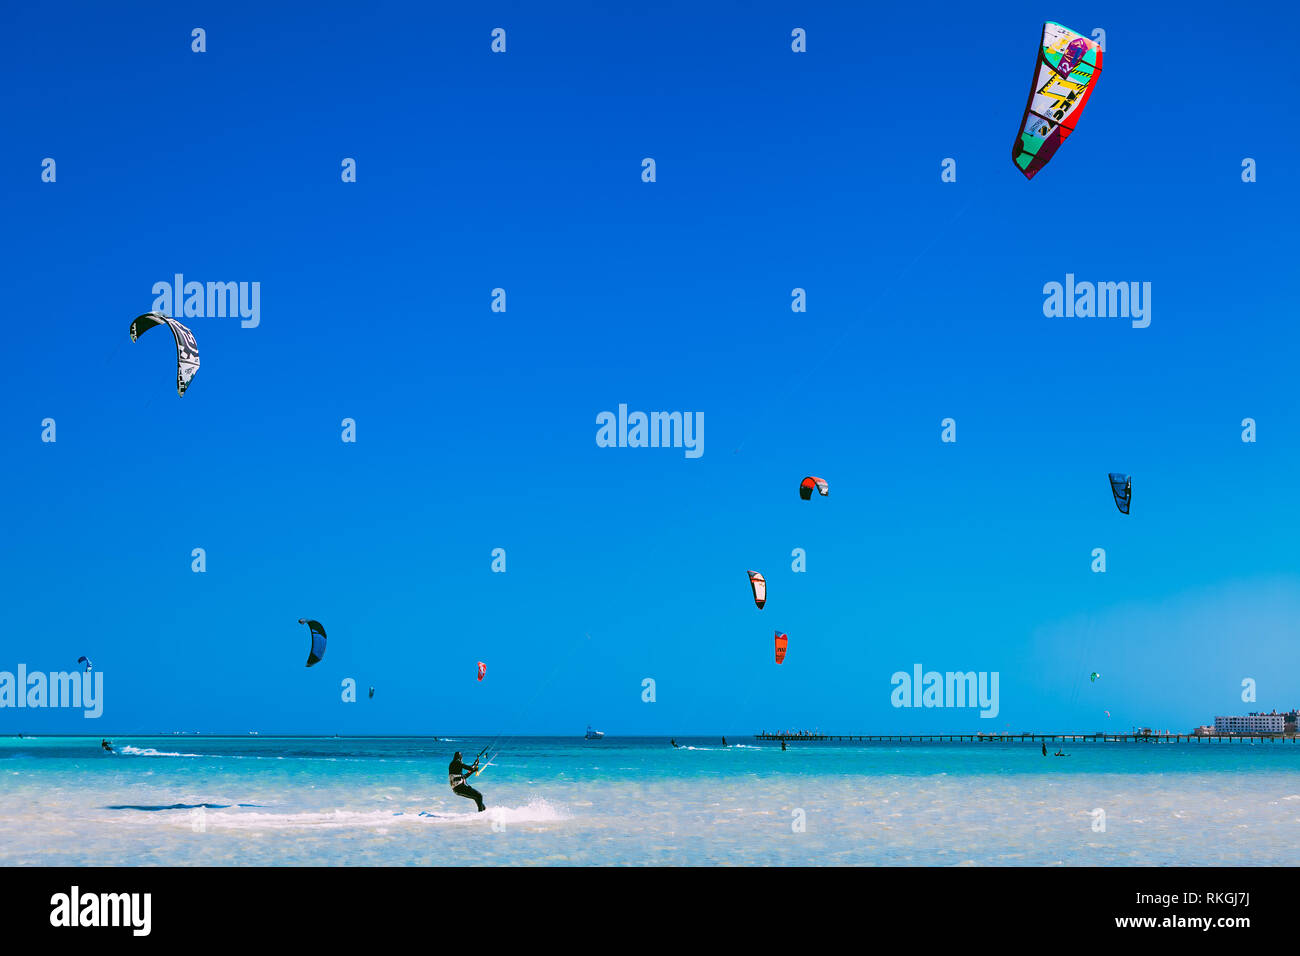 Egypt, Hurghada - 30 November, 2017: Numerous flying kites in the blue sky over the Red sea surface. The professional kitesurfers gliding on the waves Stock Photo